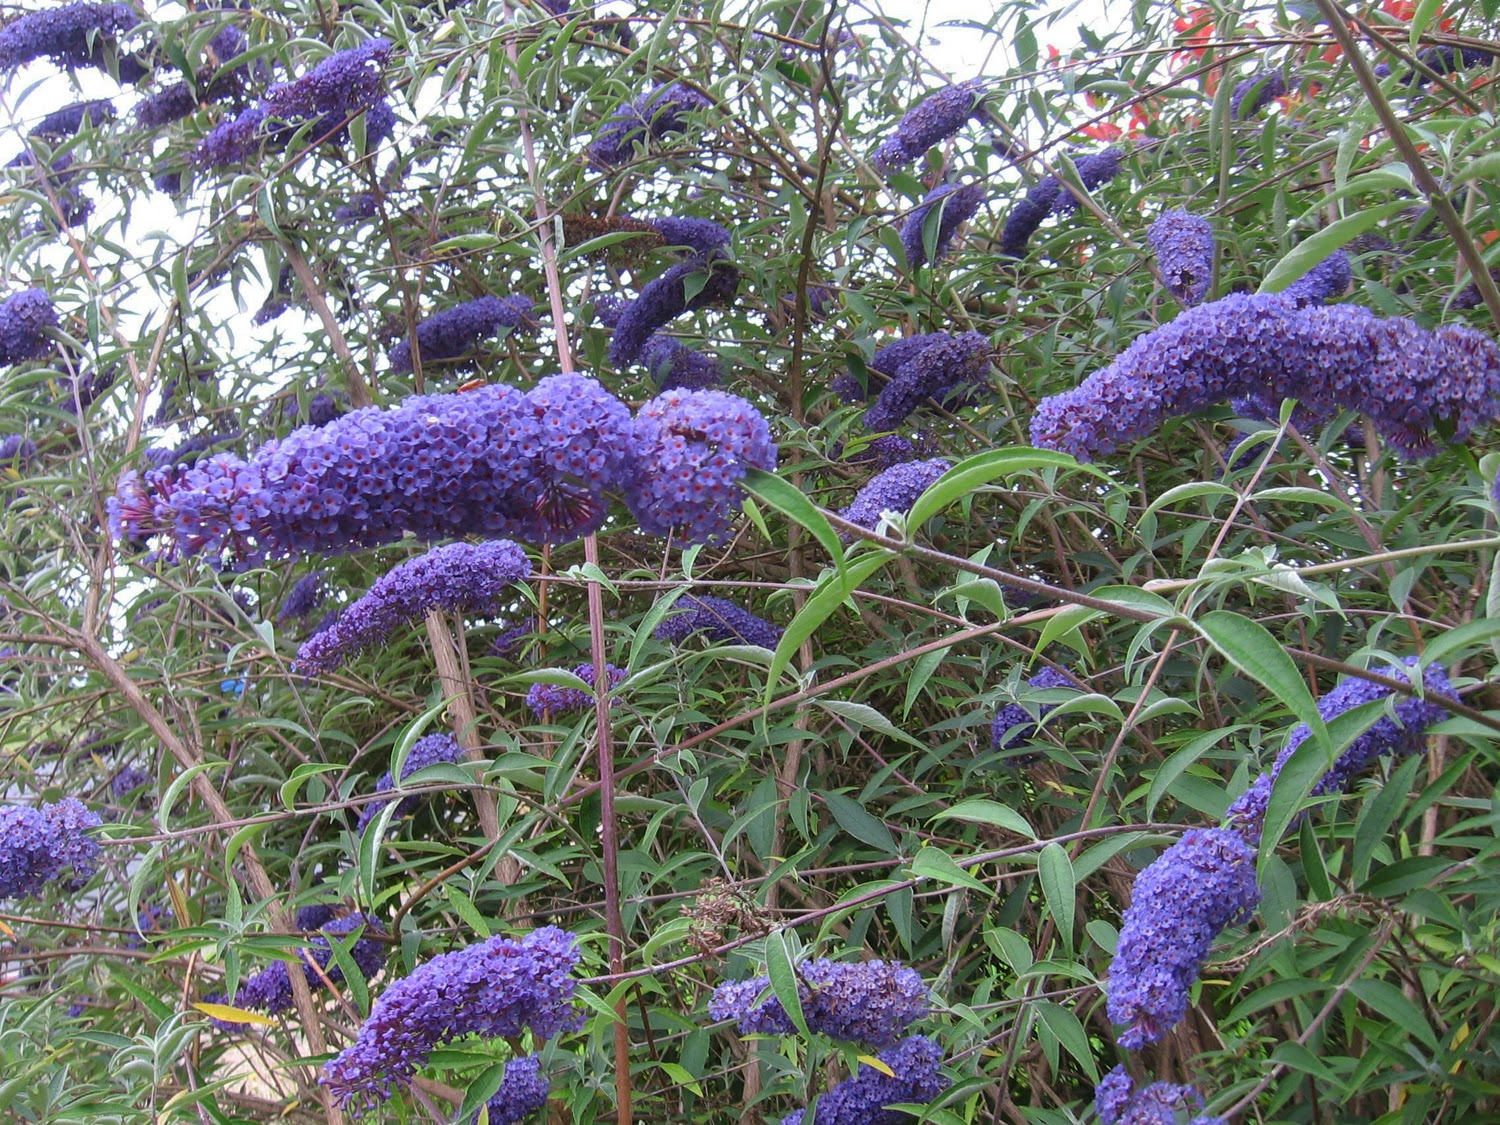 Perfume Project NW: THE BUTTERFLY BUSH PROBLEM